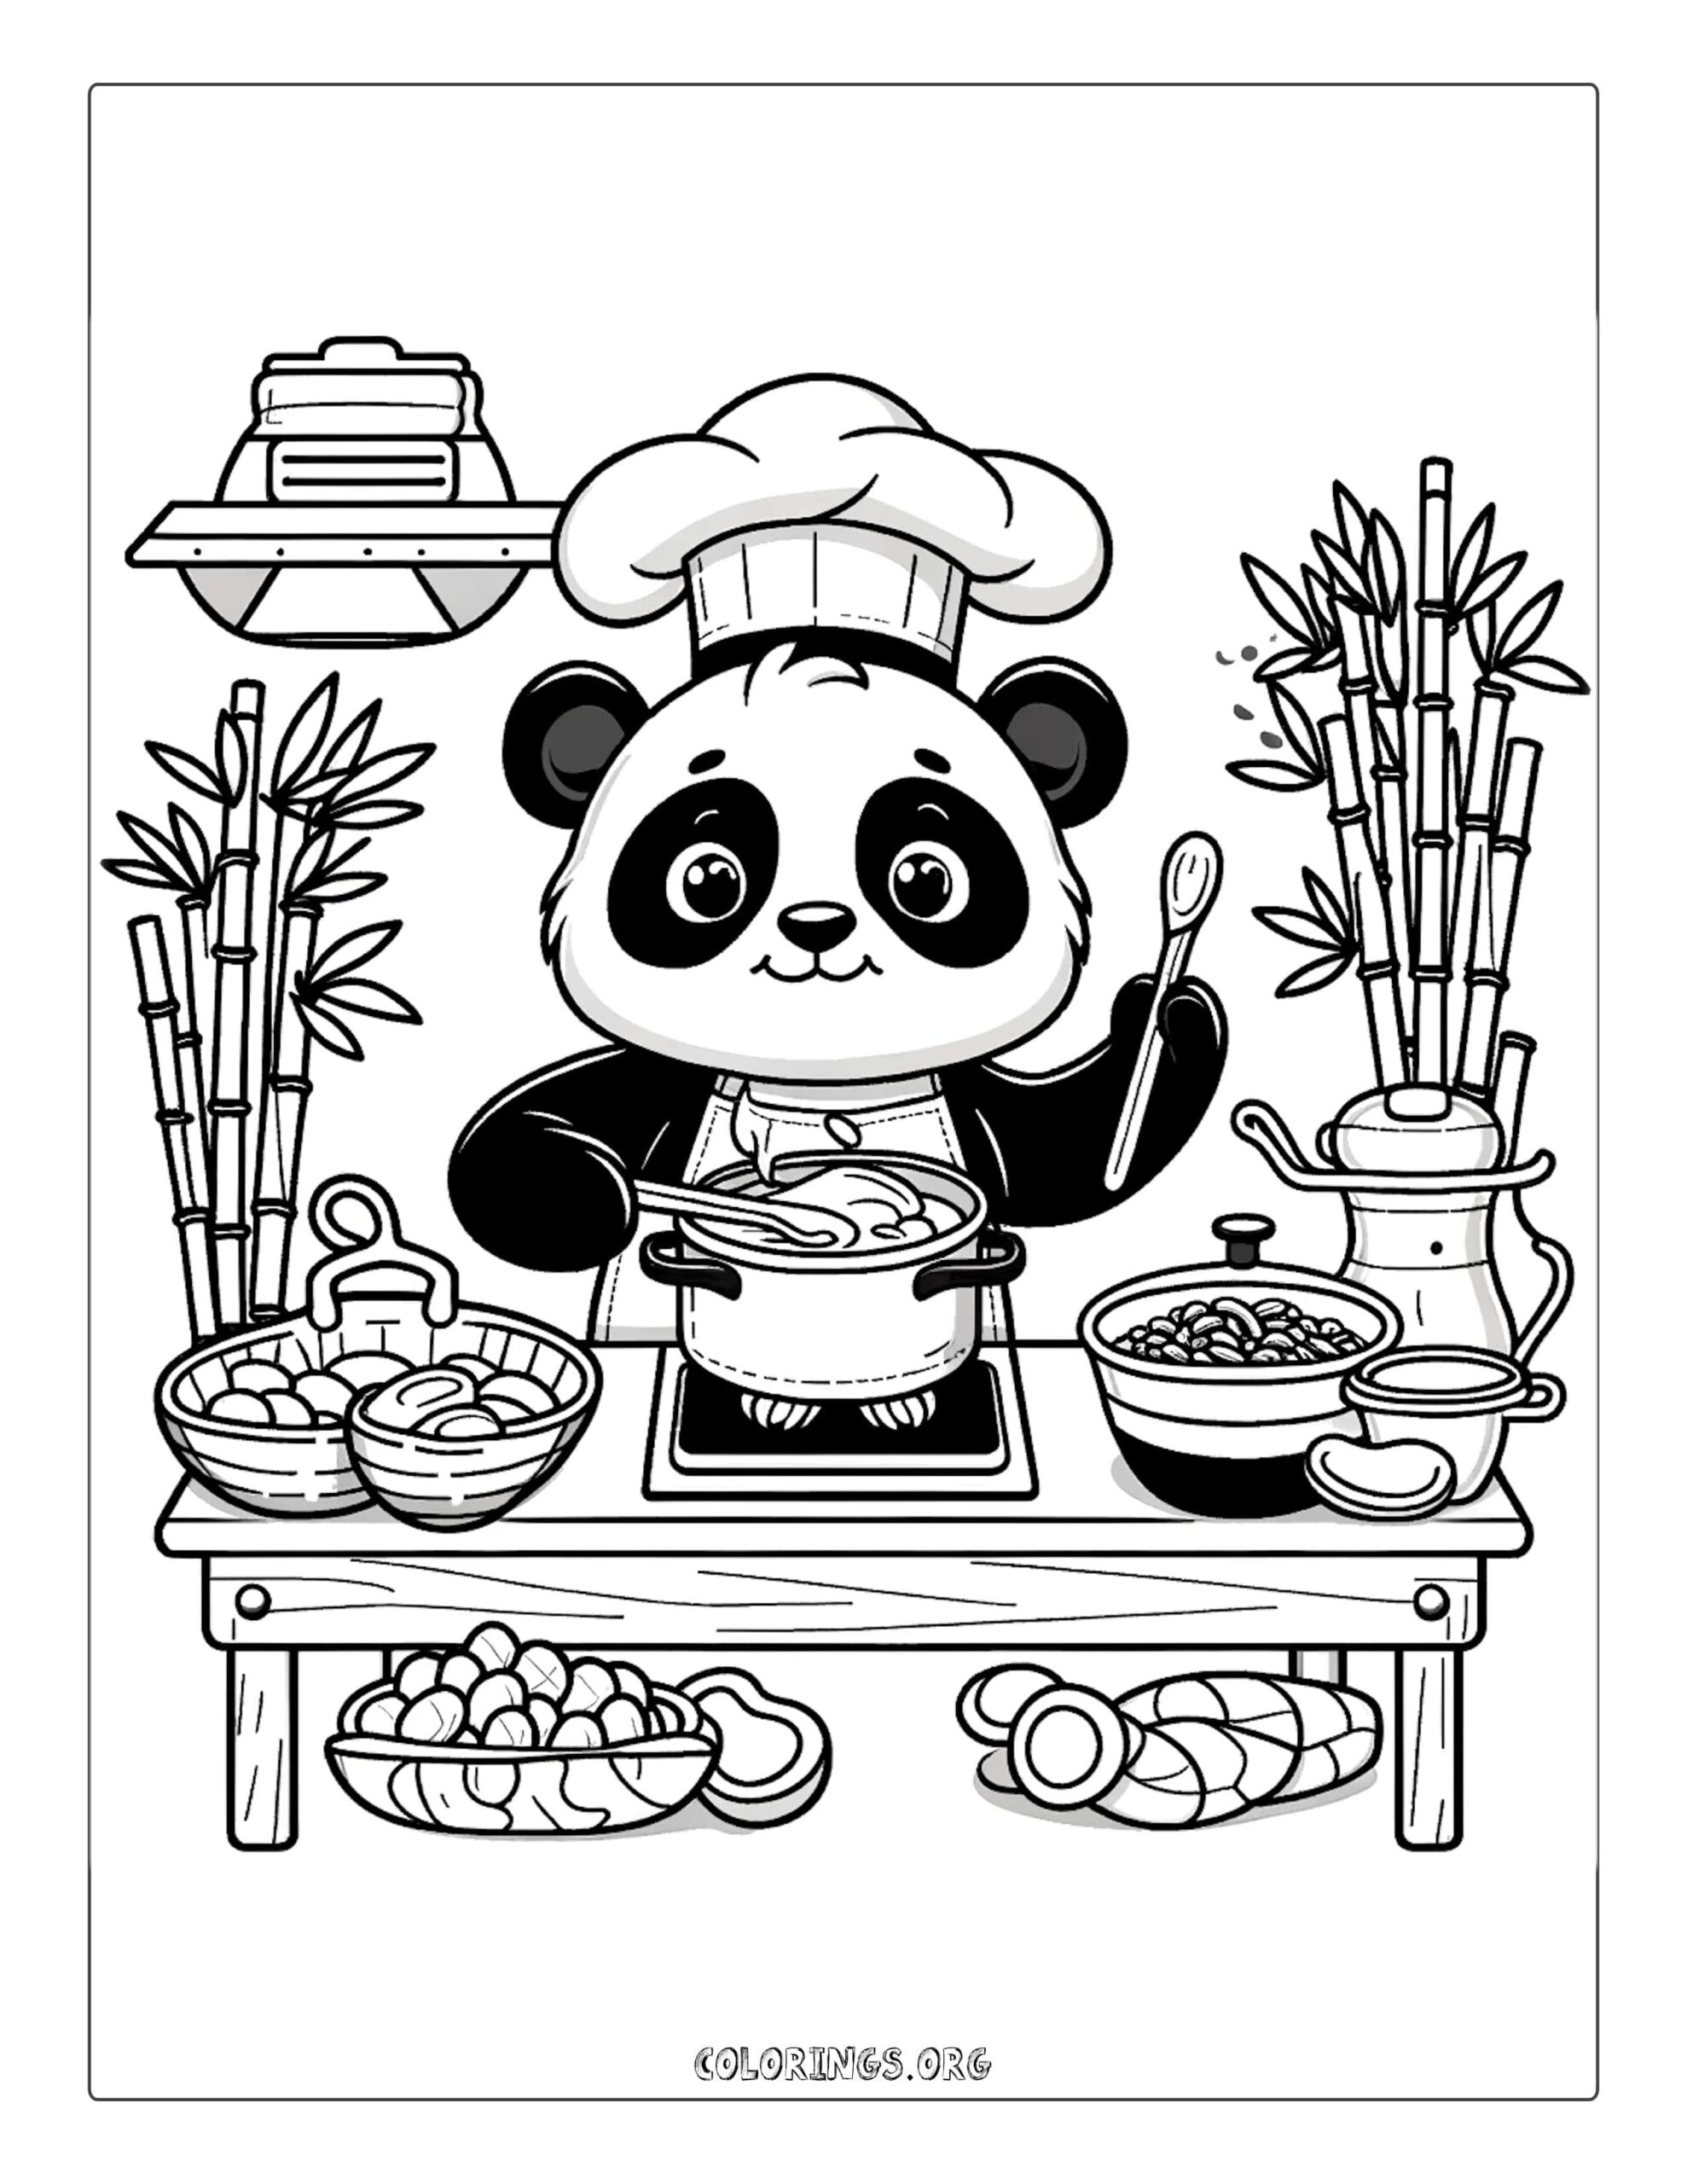 Panda Chef in Kitchen Coloring Page